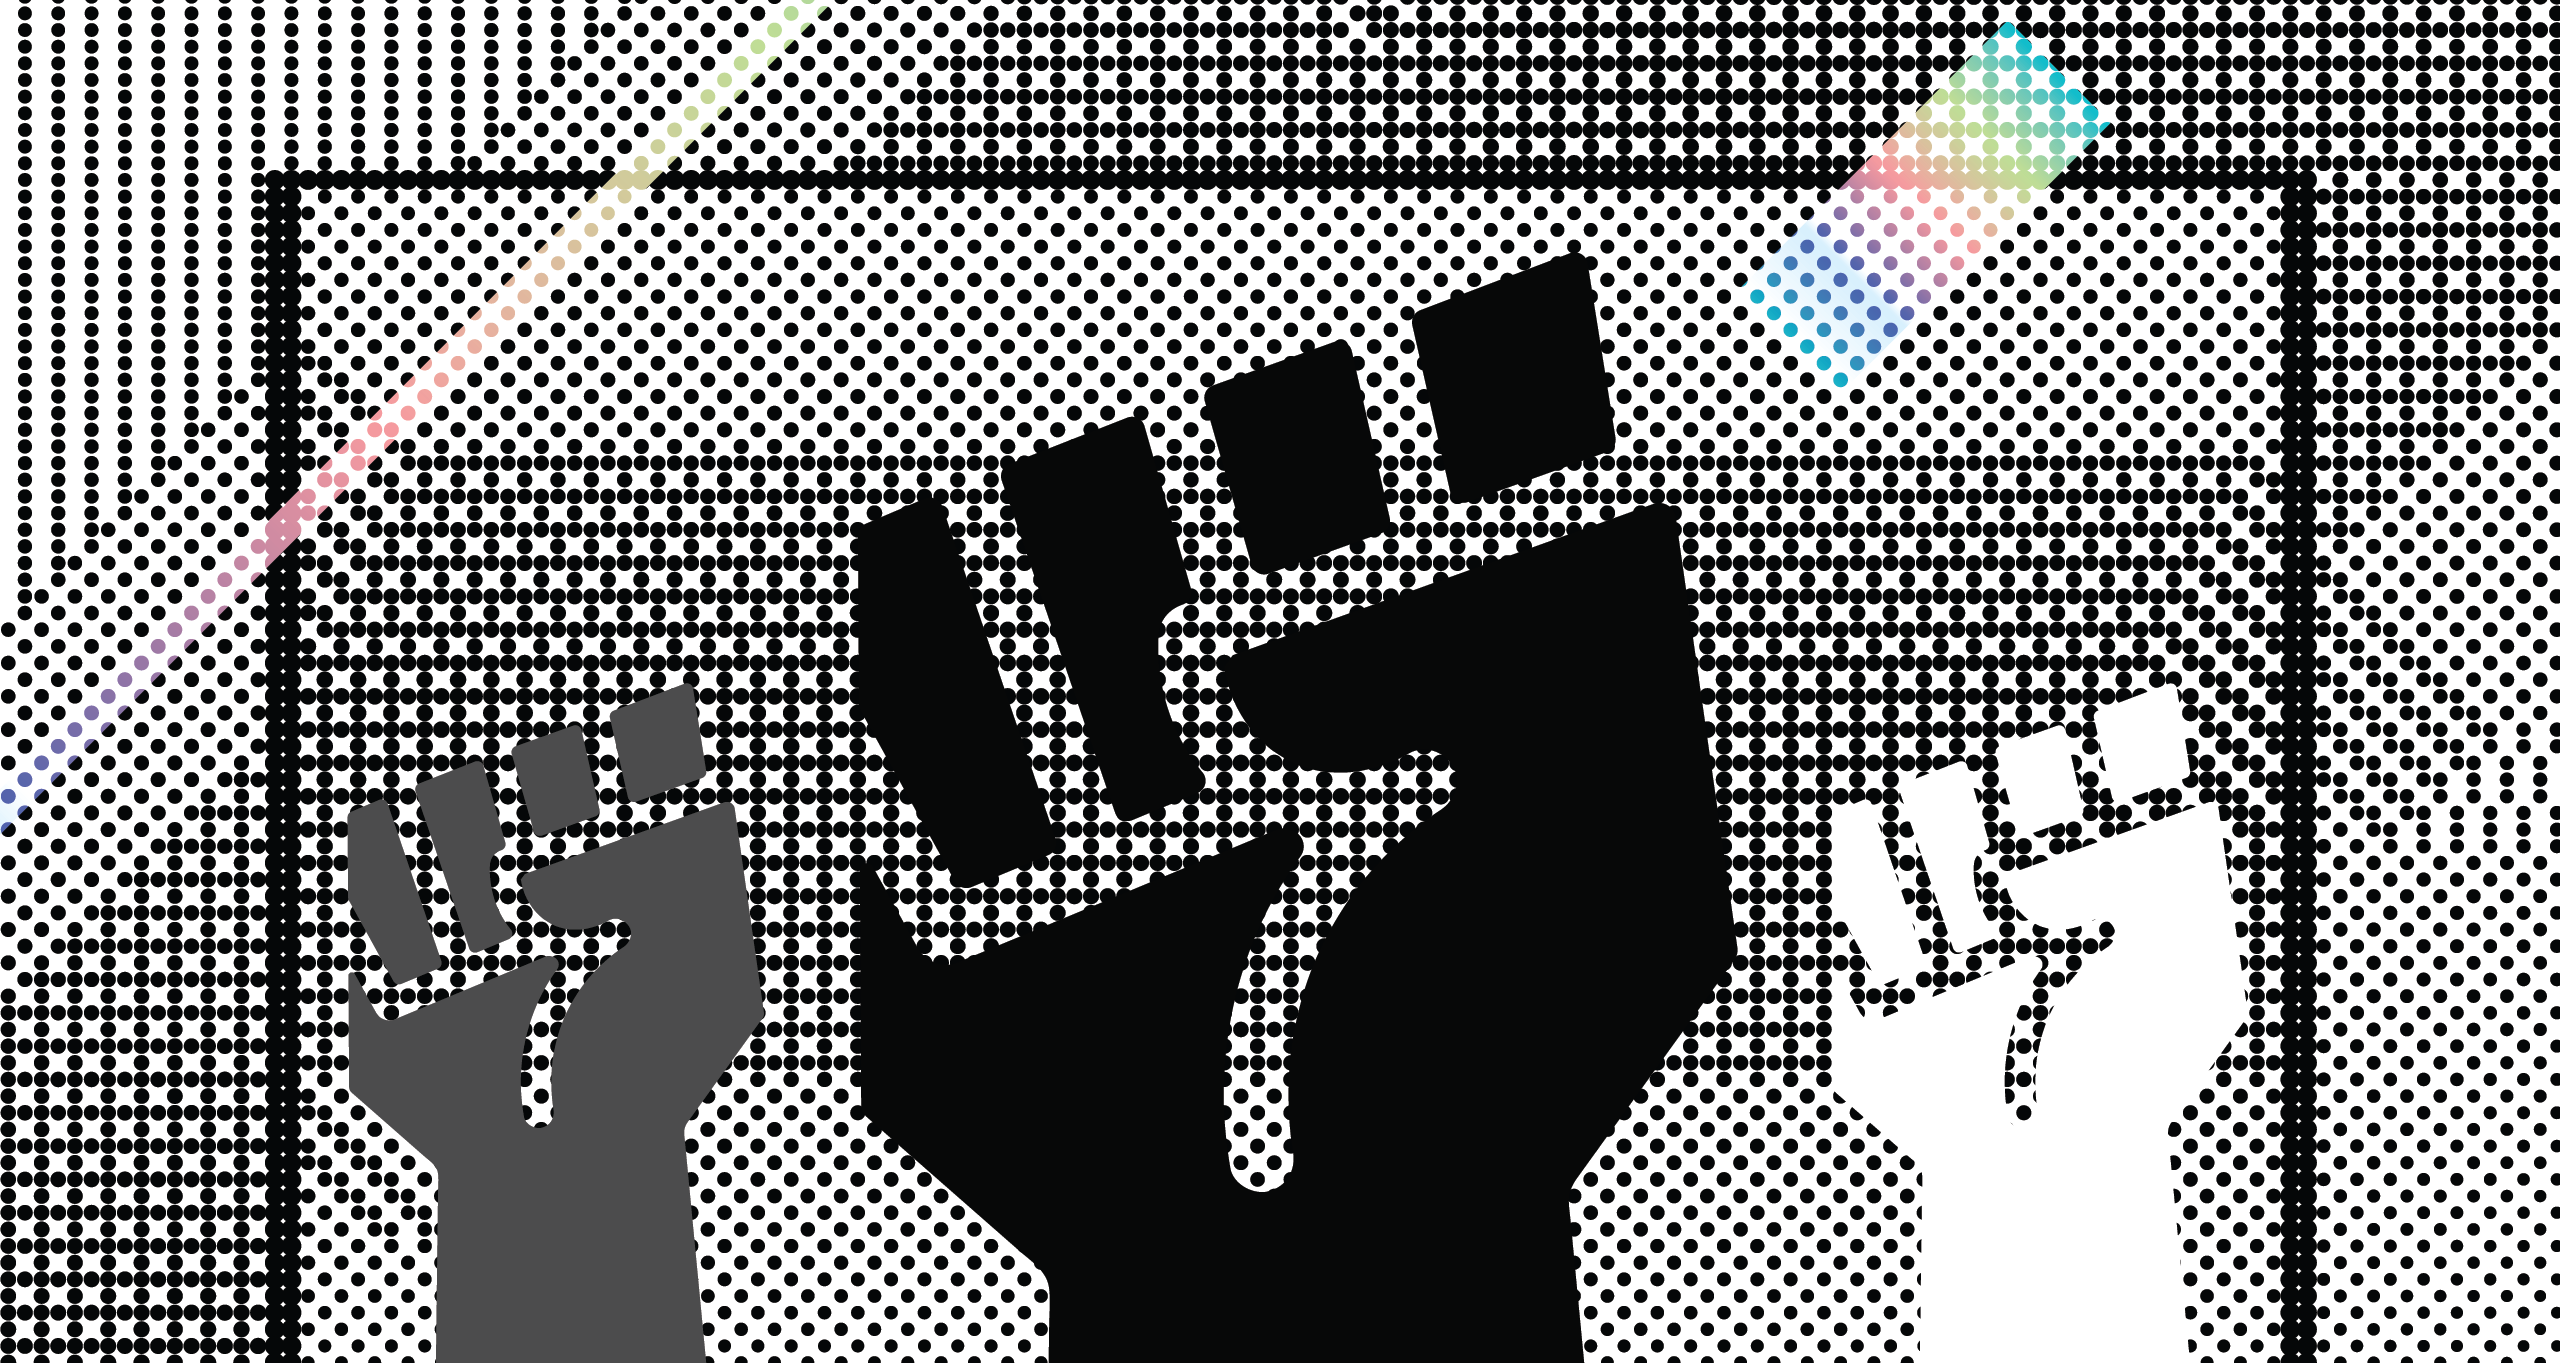 Retro image of 3 strong fists being held up with dotted background and gradient angled stripes that look like strobes.